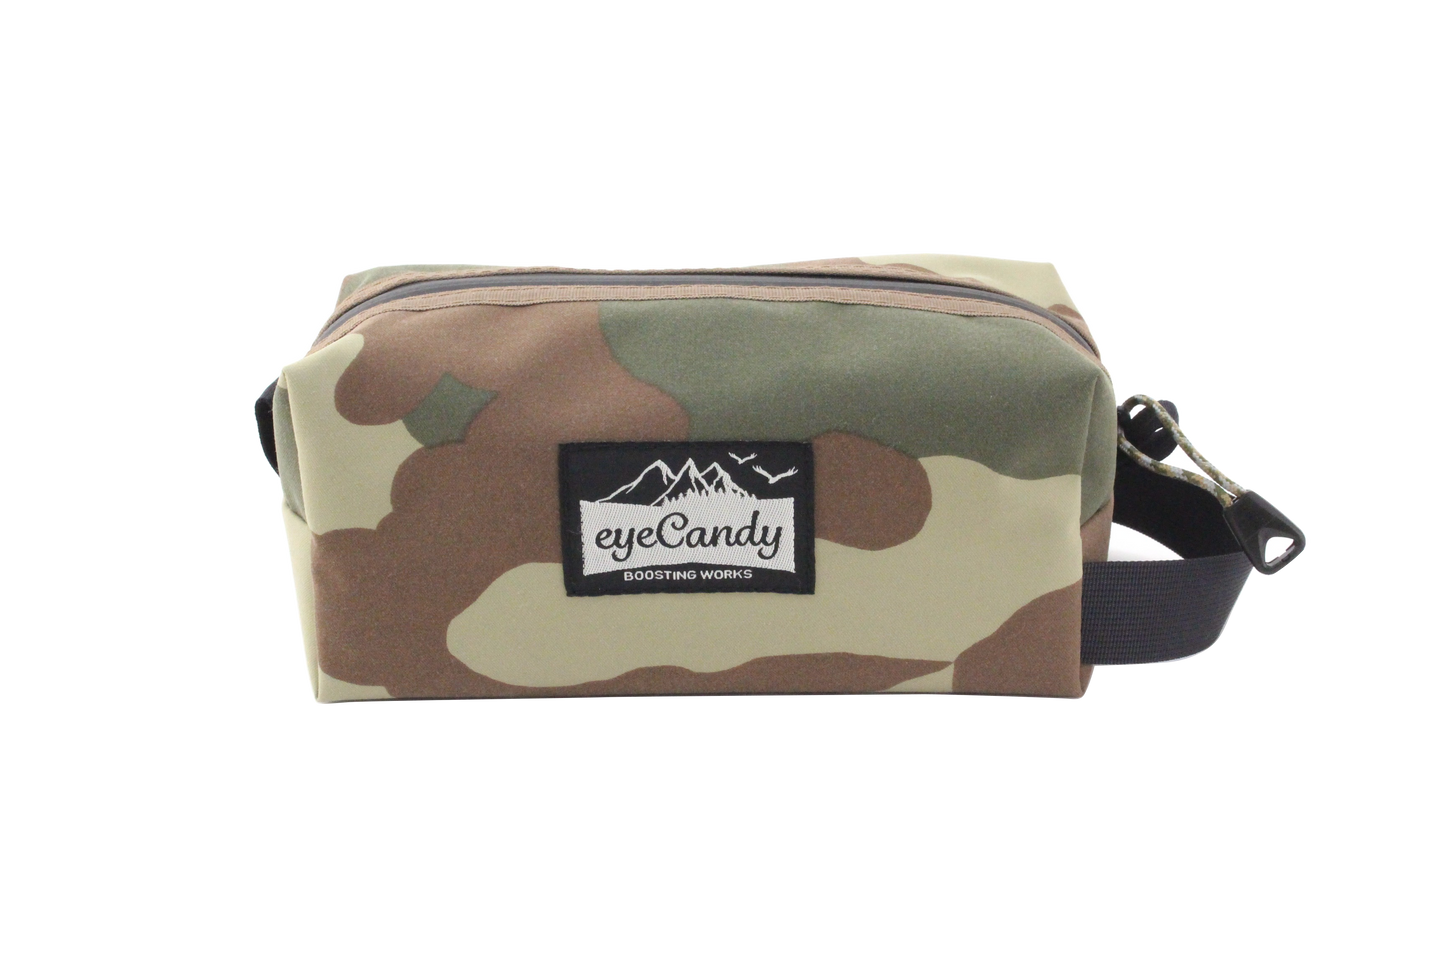 TACTICAL POUCH